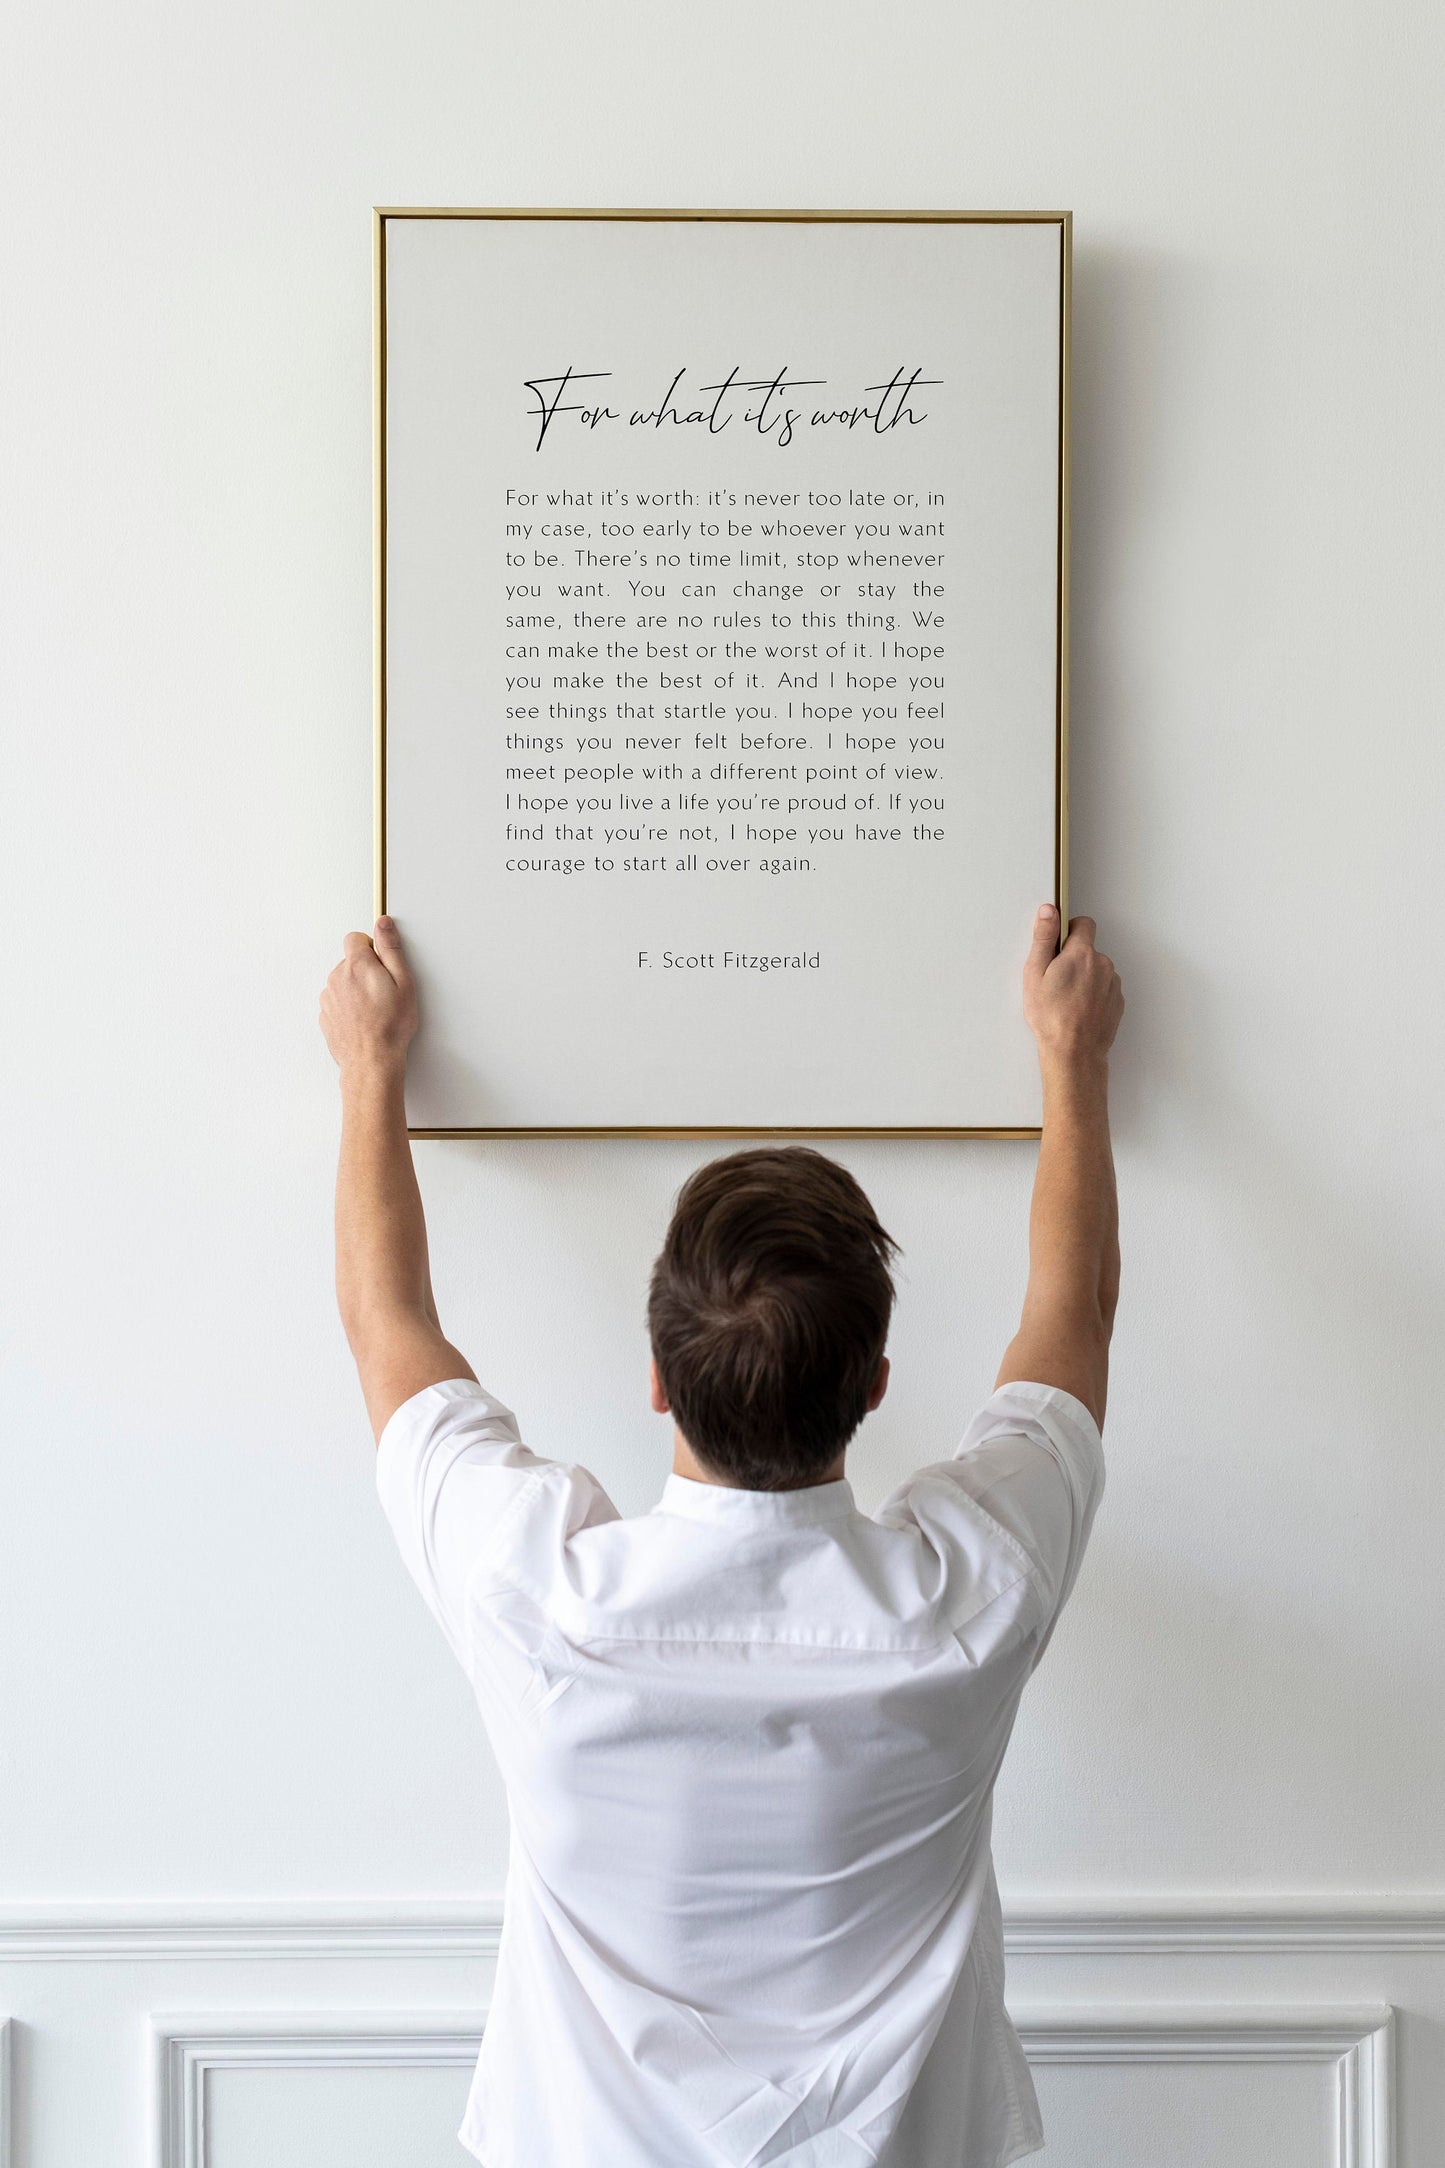 For what it's worth Print Framed poem, F. Scott Fitzgerald Poem, Framed Calligraphy & Typography For what it's worth quote, Benjamin Button